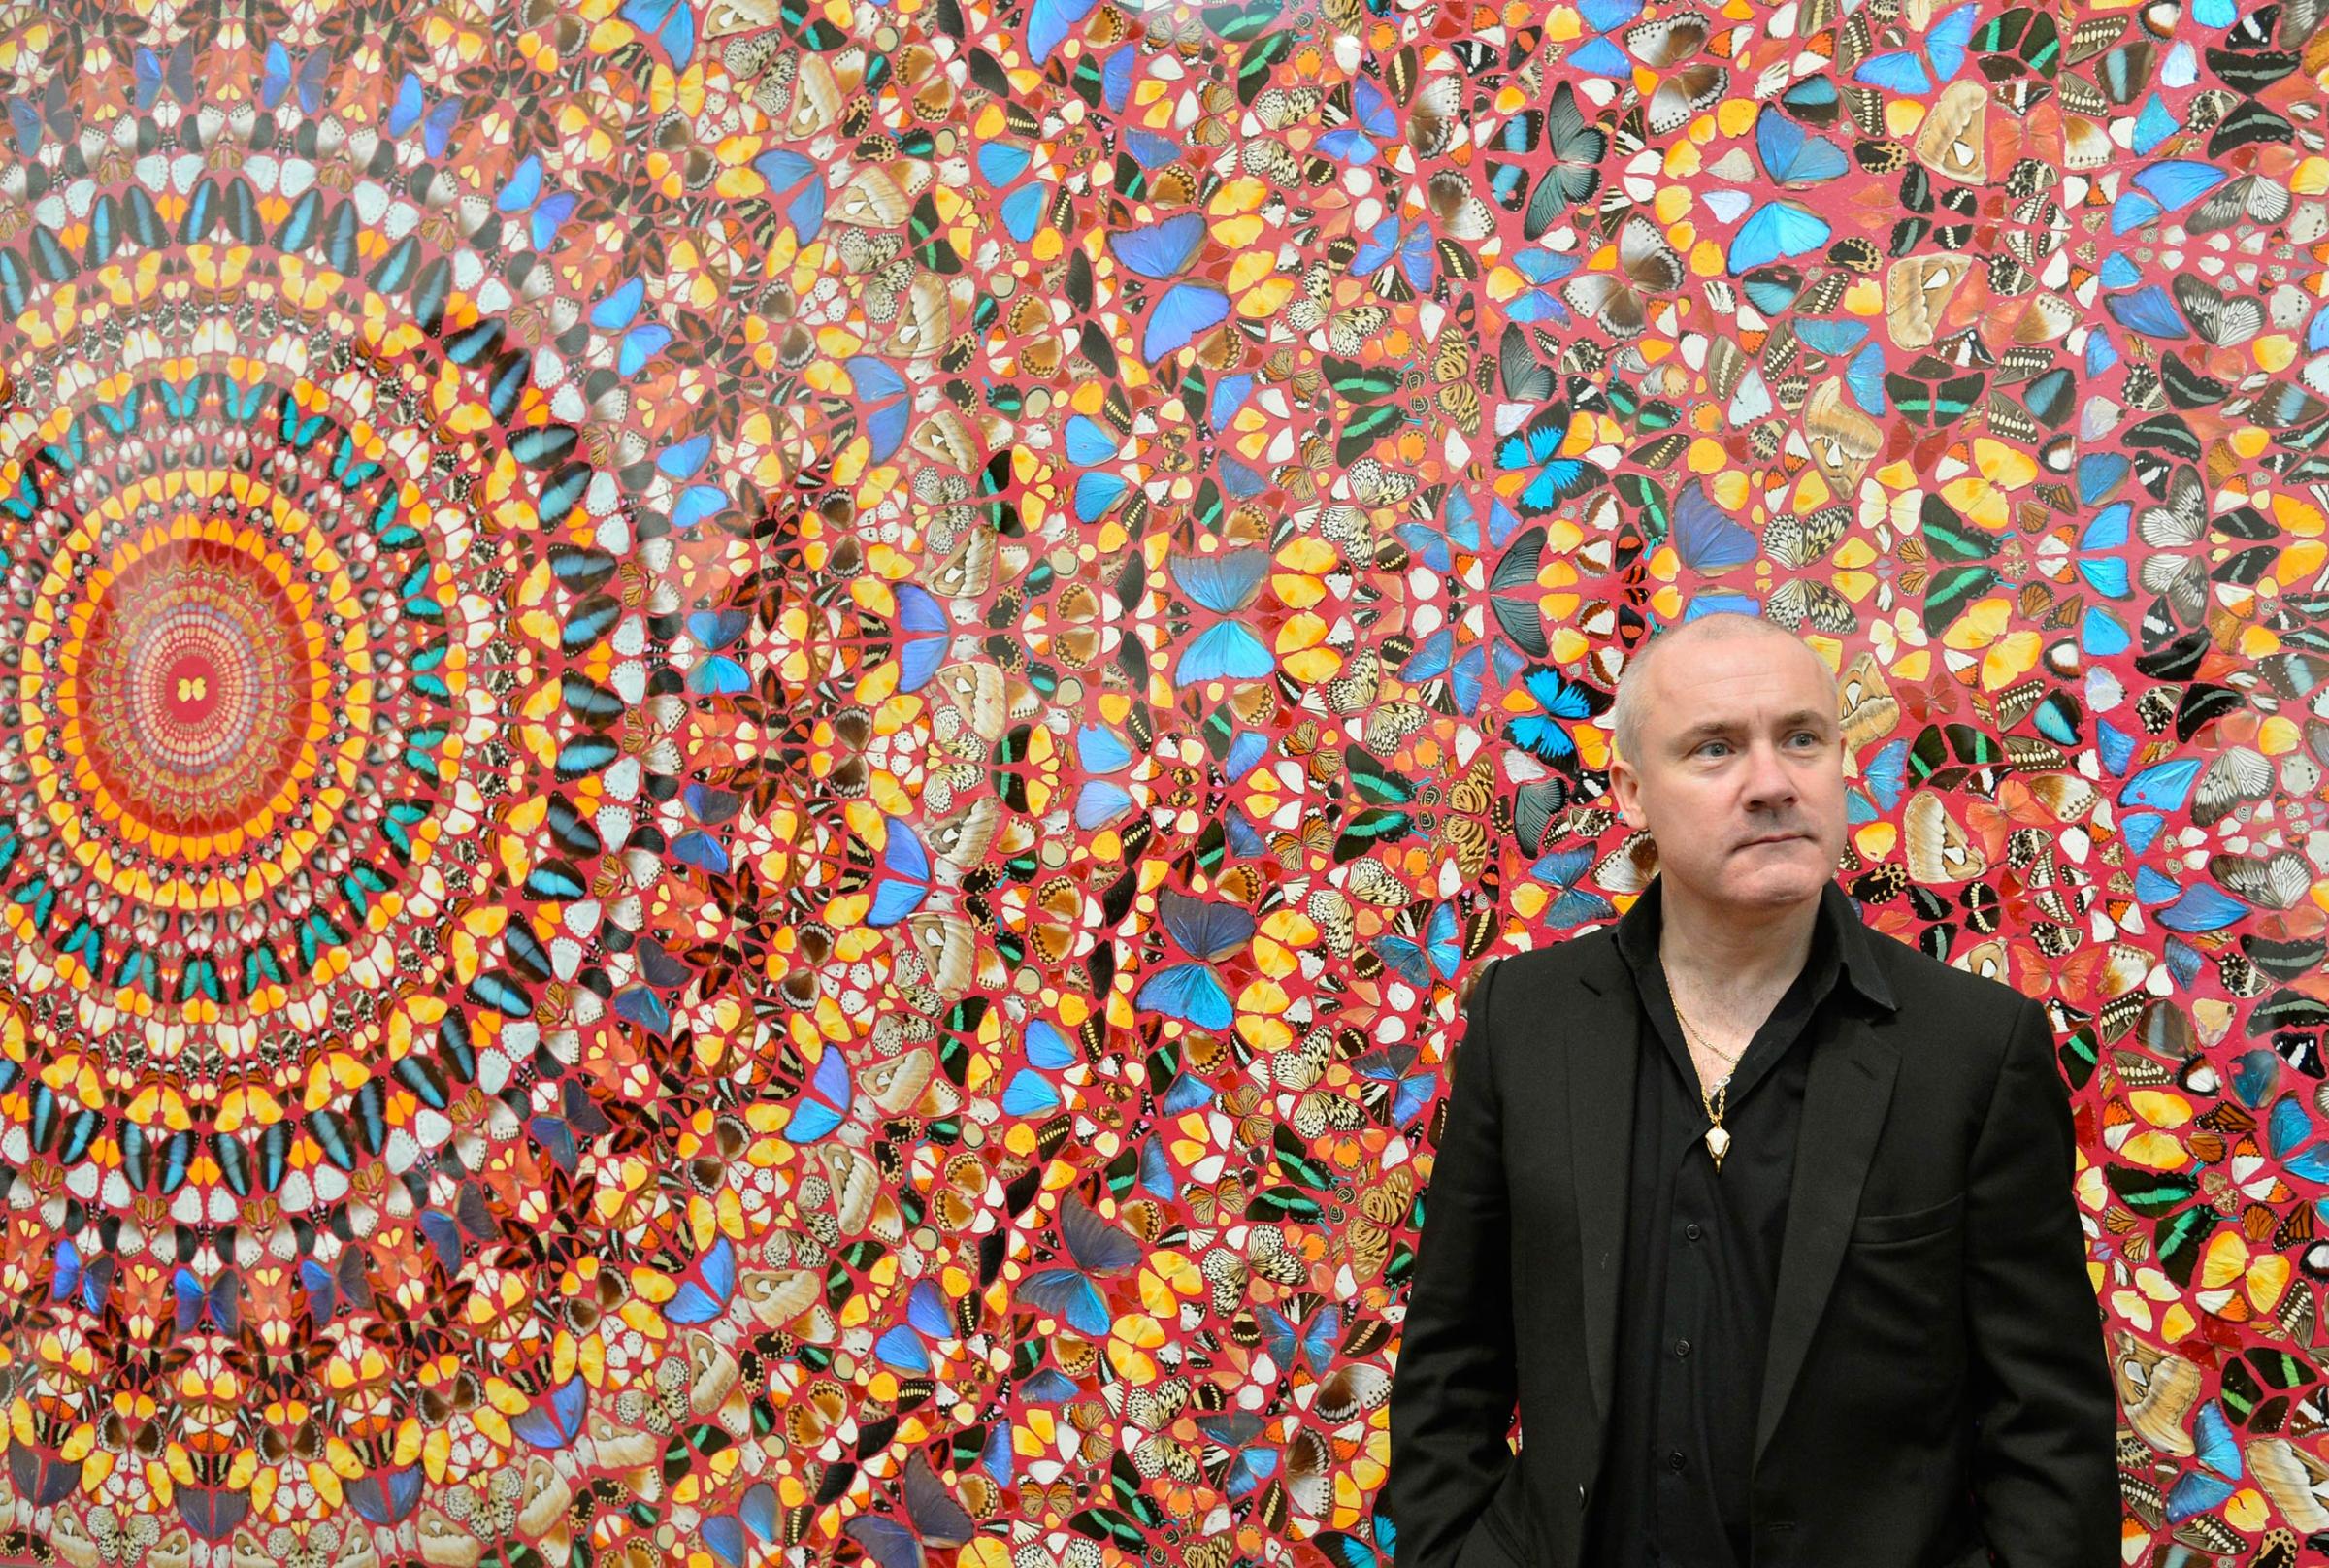 British artist Damien Hirst poses next to his painting "I Am Become Death, Shatterer of Worlds", at the Tate Modern gallery in London